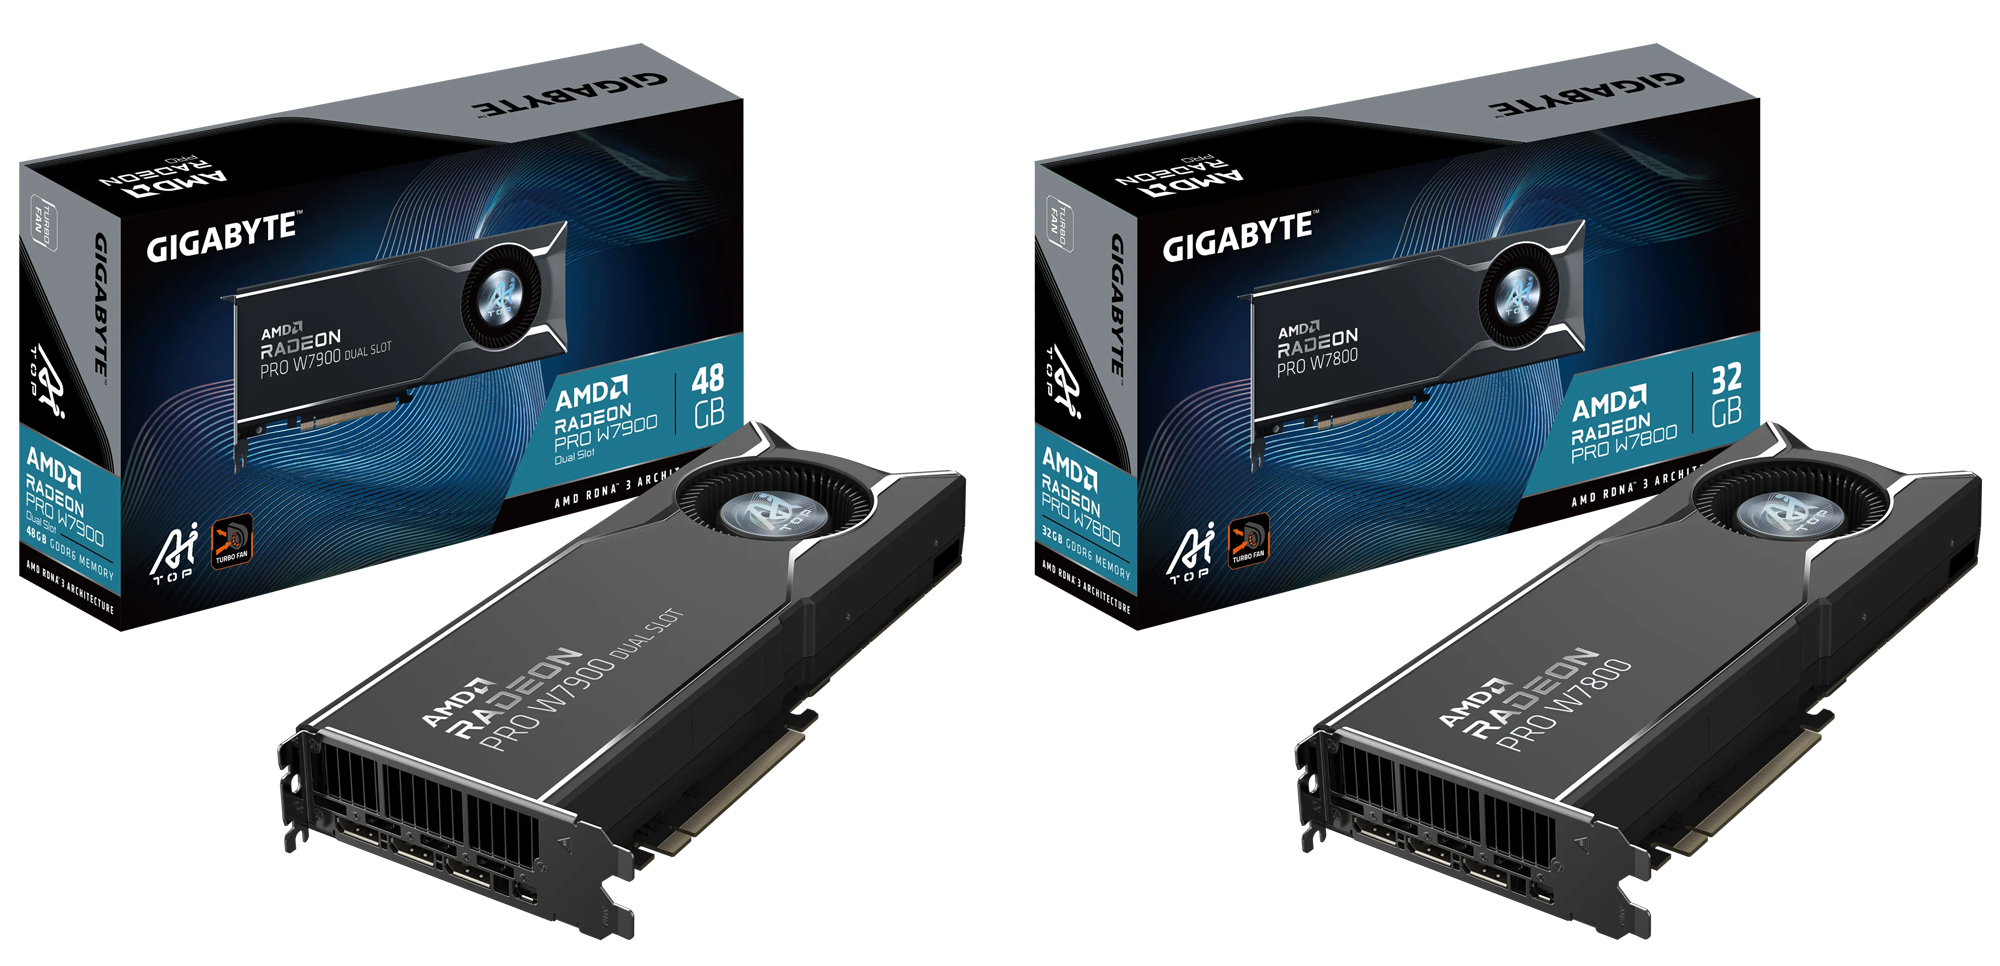 Media asset in full size related to 3dfxzone.it news item entitled as follows: GIGABYTE annuncia le Radeon PRO W7900 Dual Slot AI TOP 48G e W7800 AI TOP 32G | Image Name: news35721_GIGABYTE_Radeon-PRO-W7000_1.jpg